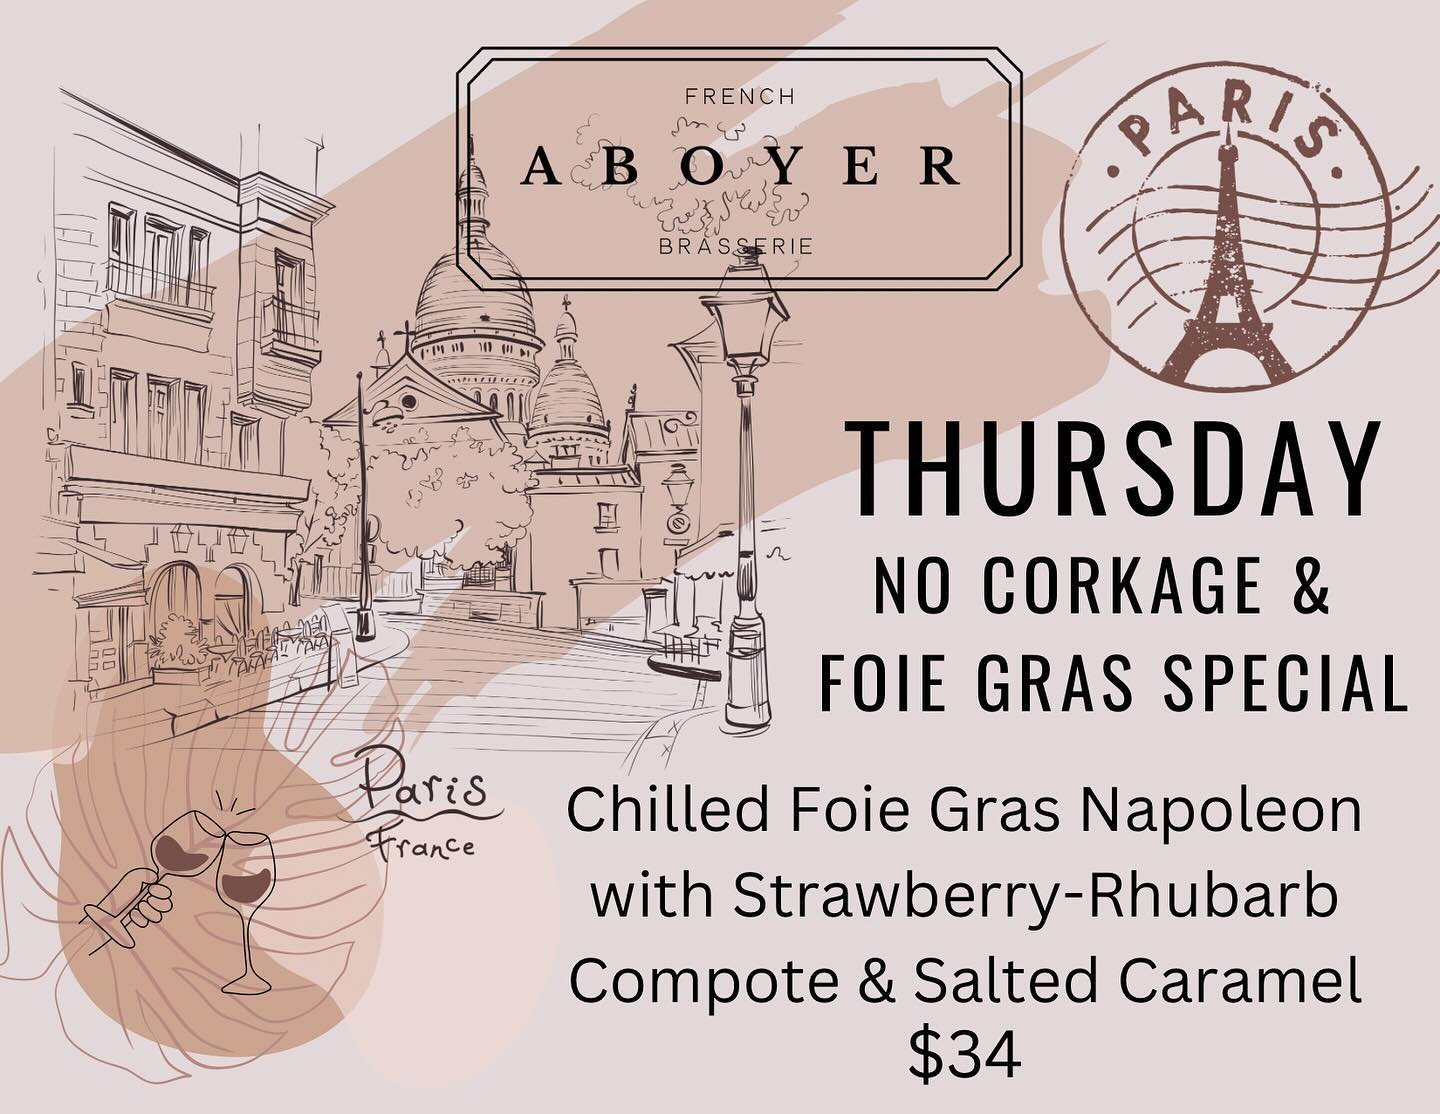 Slip away for a moment and enjoy your favorite wine with No Corkage Fee and our delicious Foie Gras special! @aboyerfrenchbrasserie Looking forward to seeing you tonight! #frenchcuisine #bistro #parisinyourbackyard #aboyer #winnetkaillinois